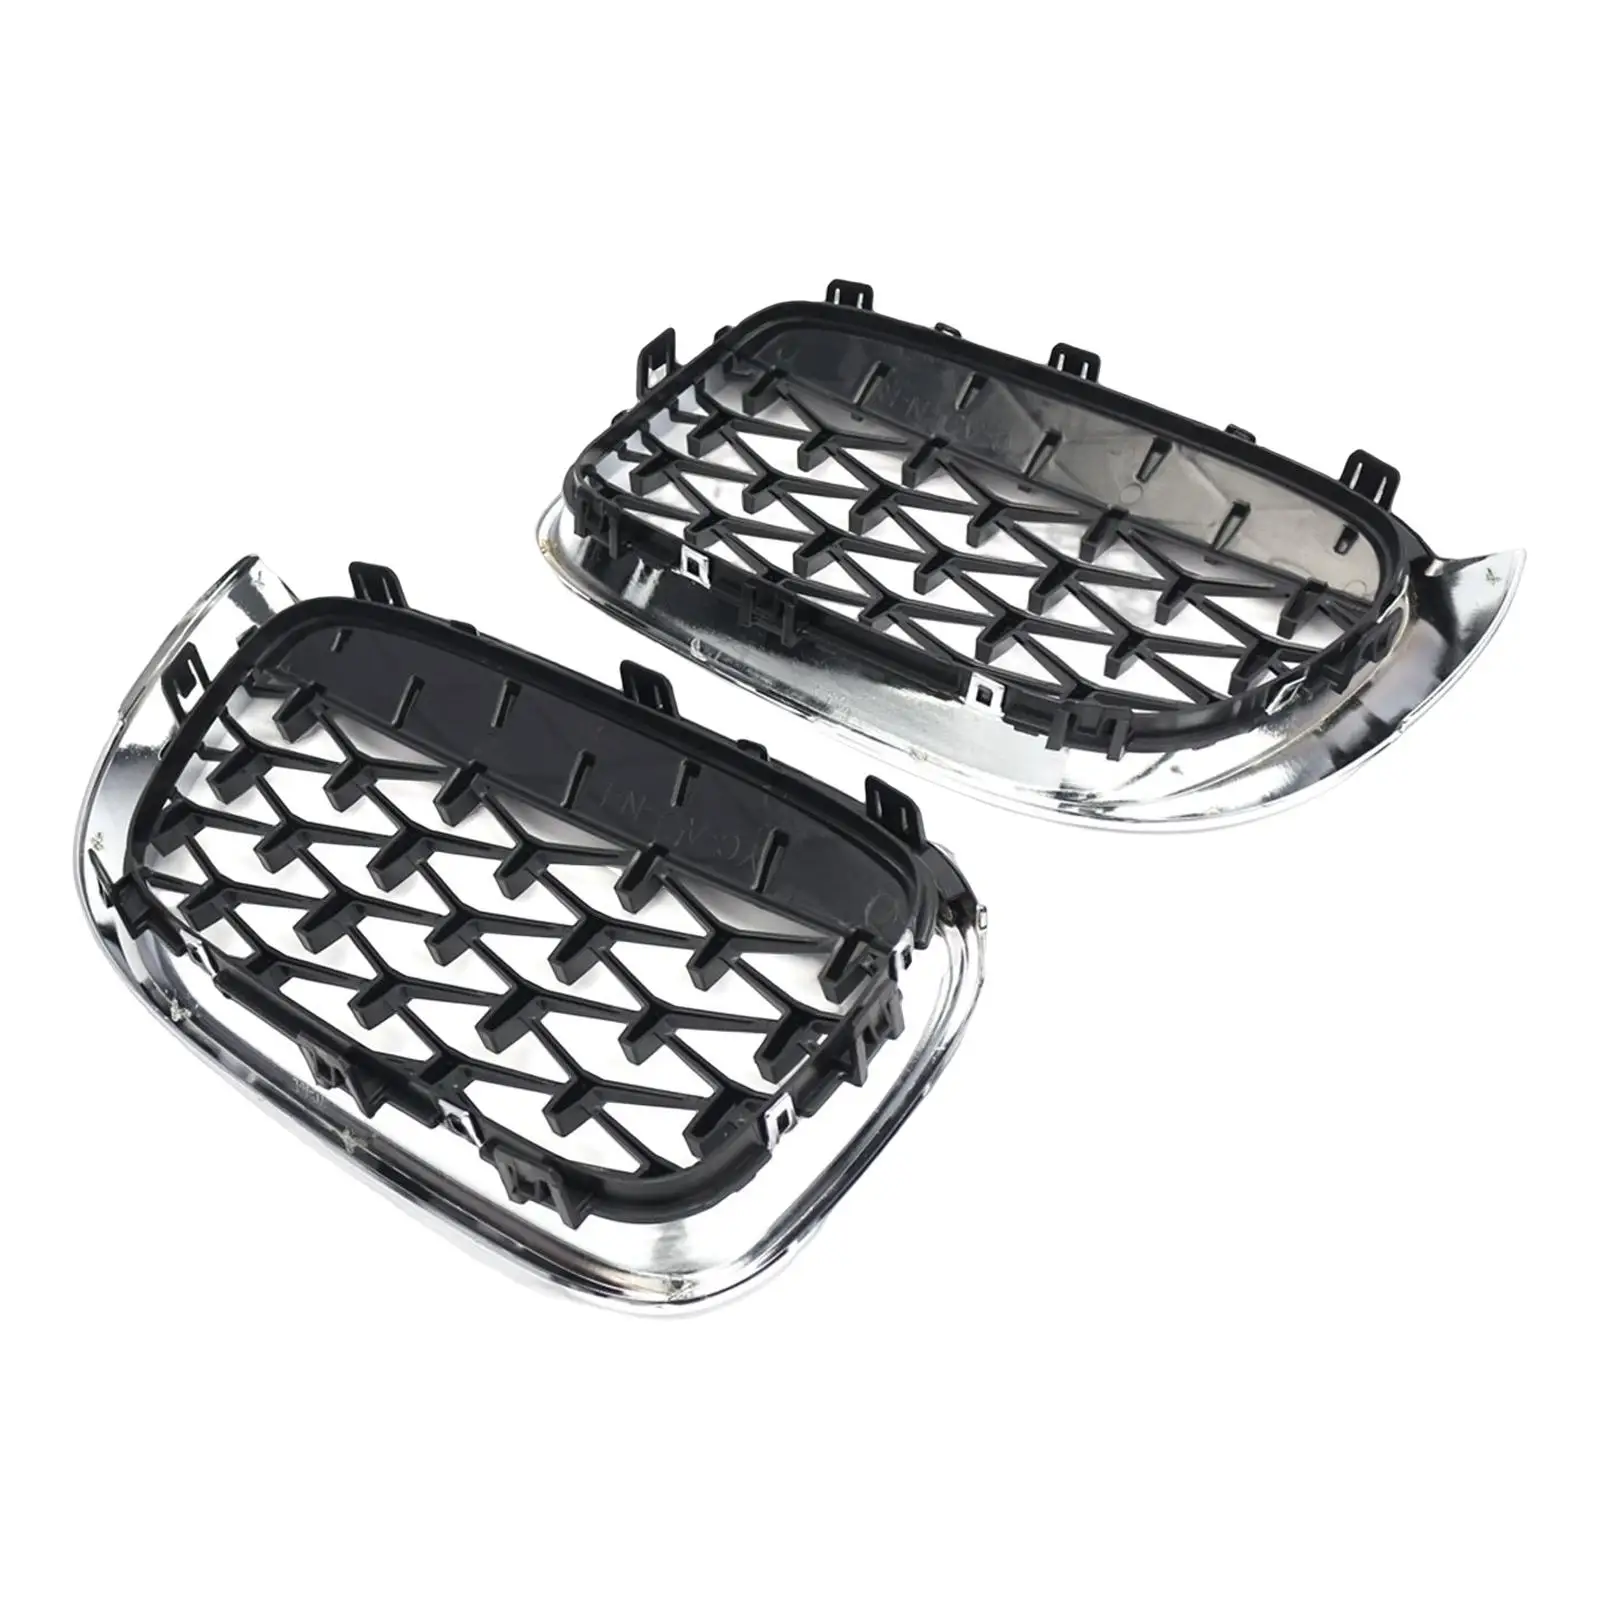 51137367422 51137367421 Easy to Install Accessories Durable Front Black Kidney Grille Grill for BMW x4 x3 F25 F26 2014-2018